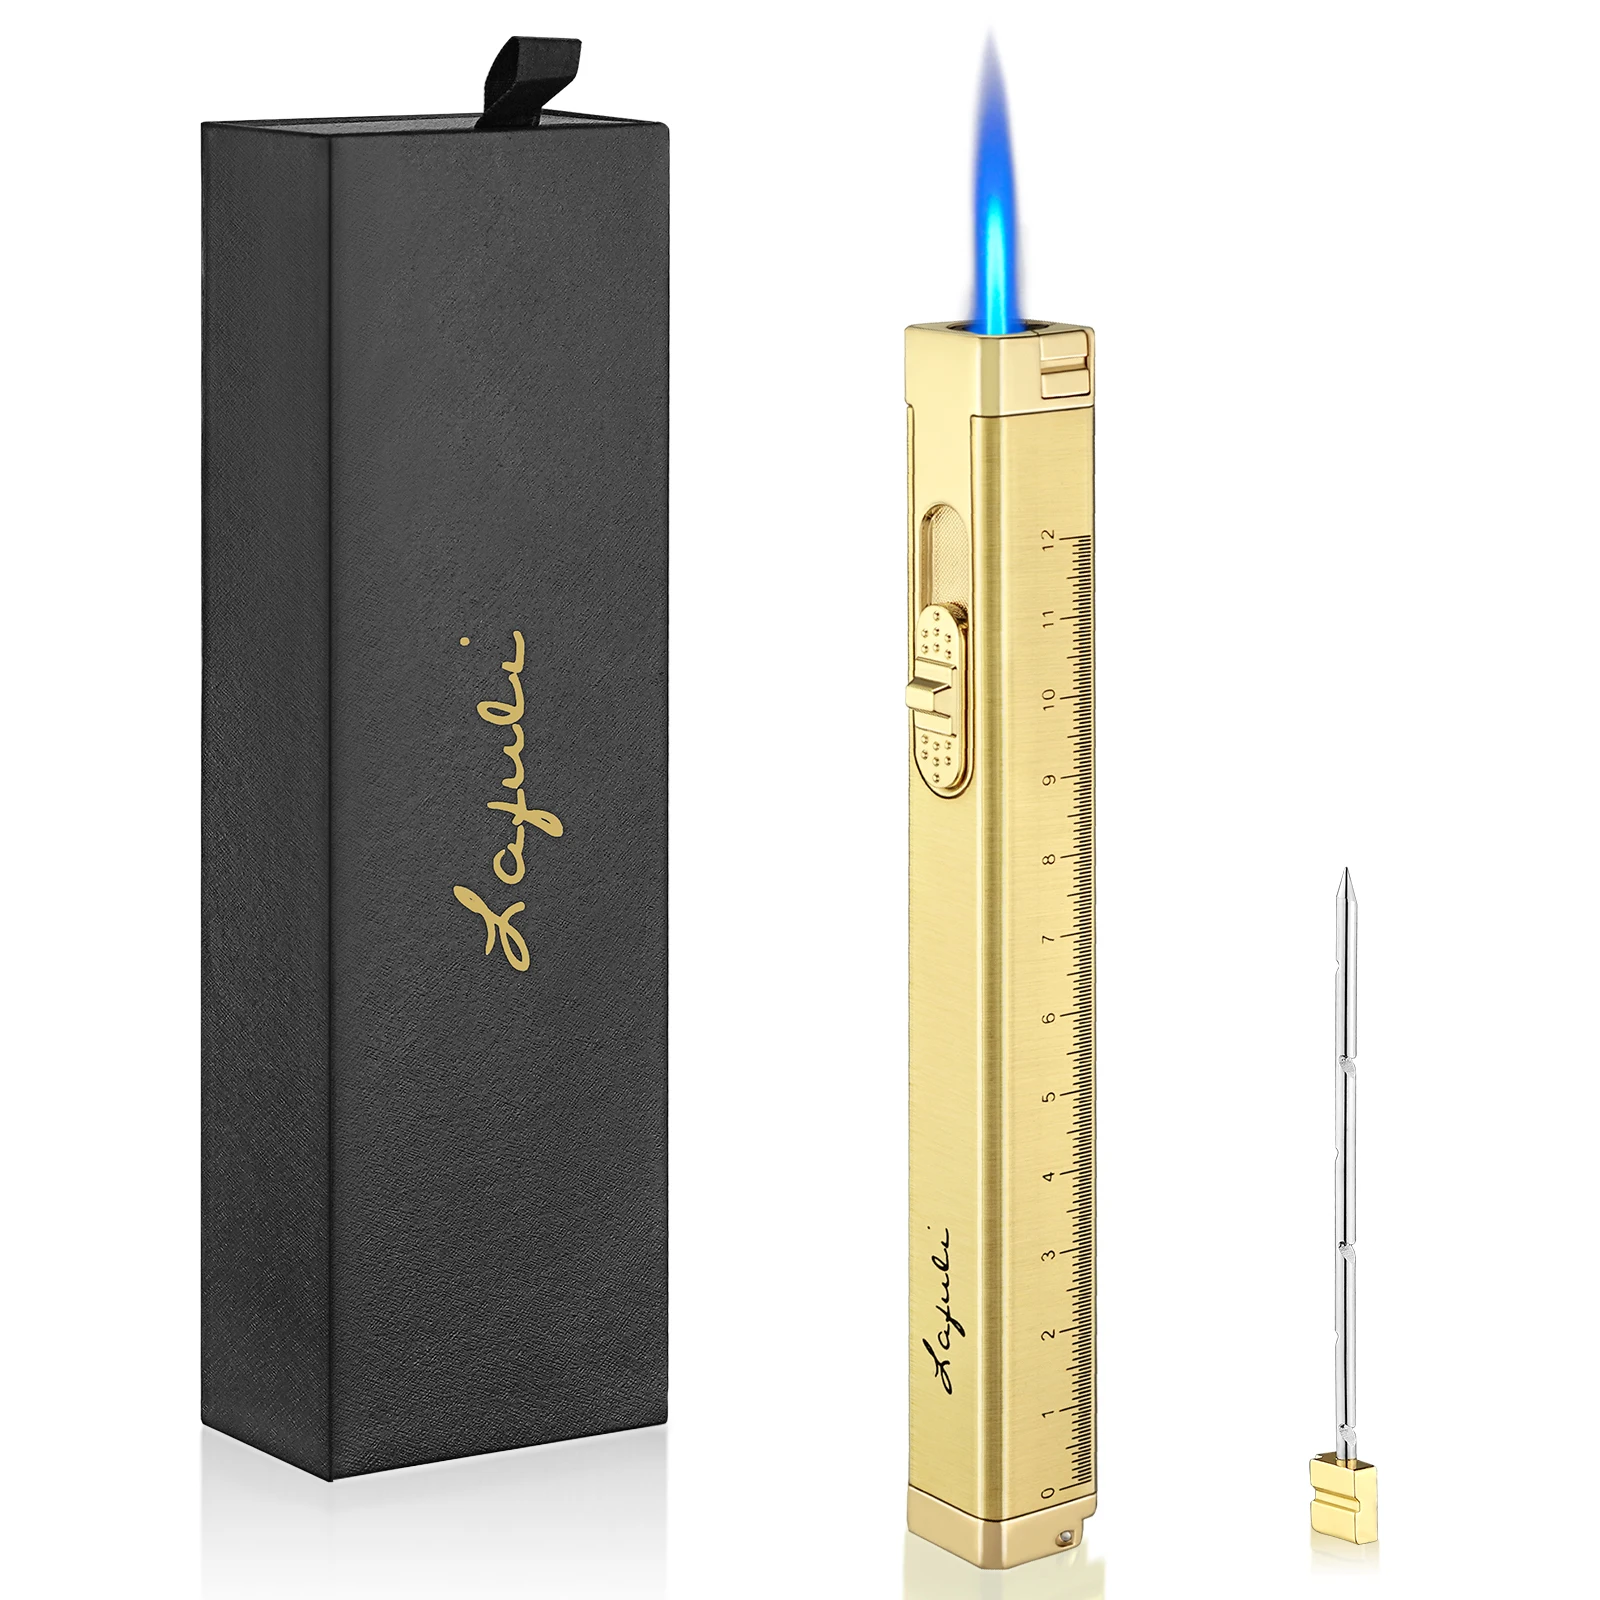 

Ruler Cigar lighter Windproof Blue Flame Metal Gas Butane Cigarette Smoking Accessories with Cigar Punch Gift Box